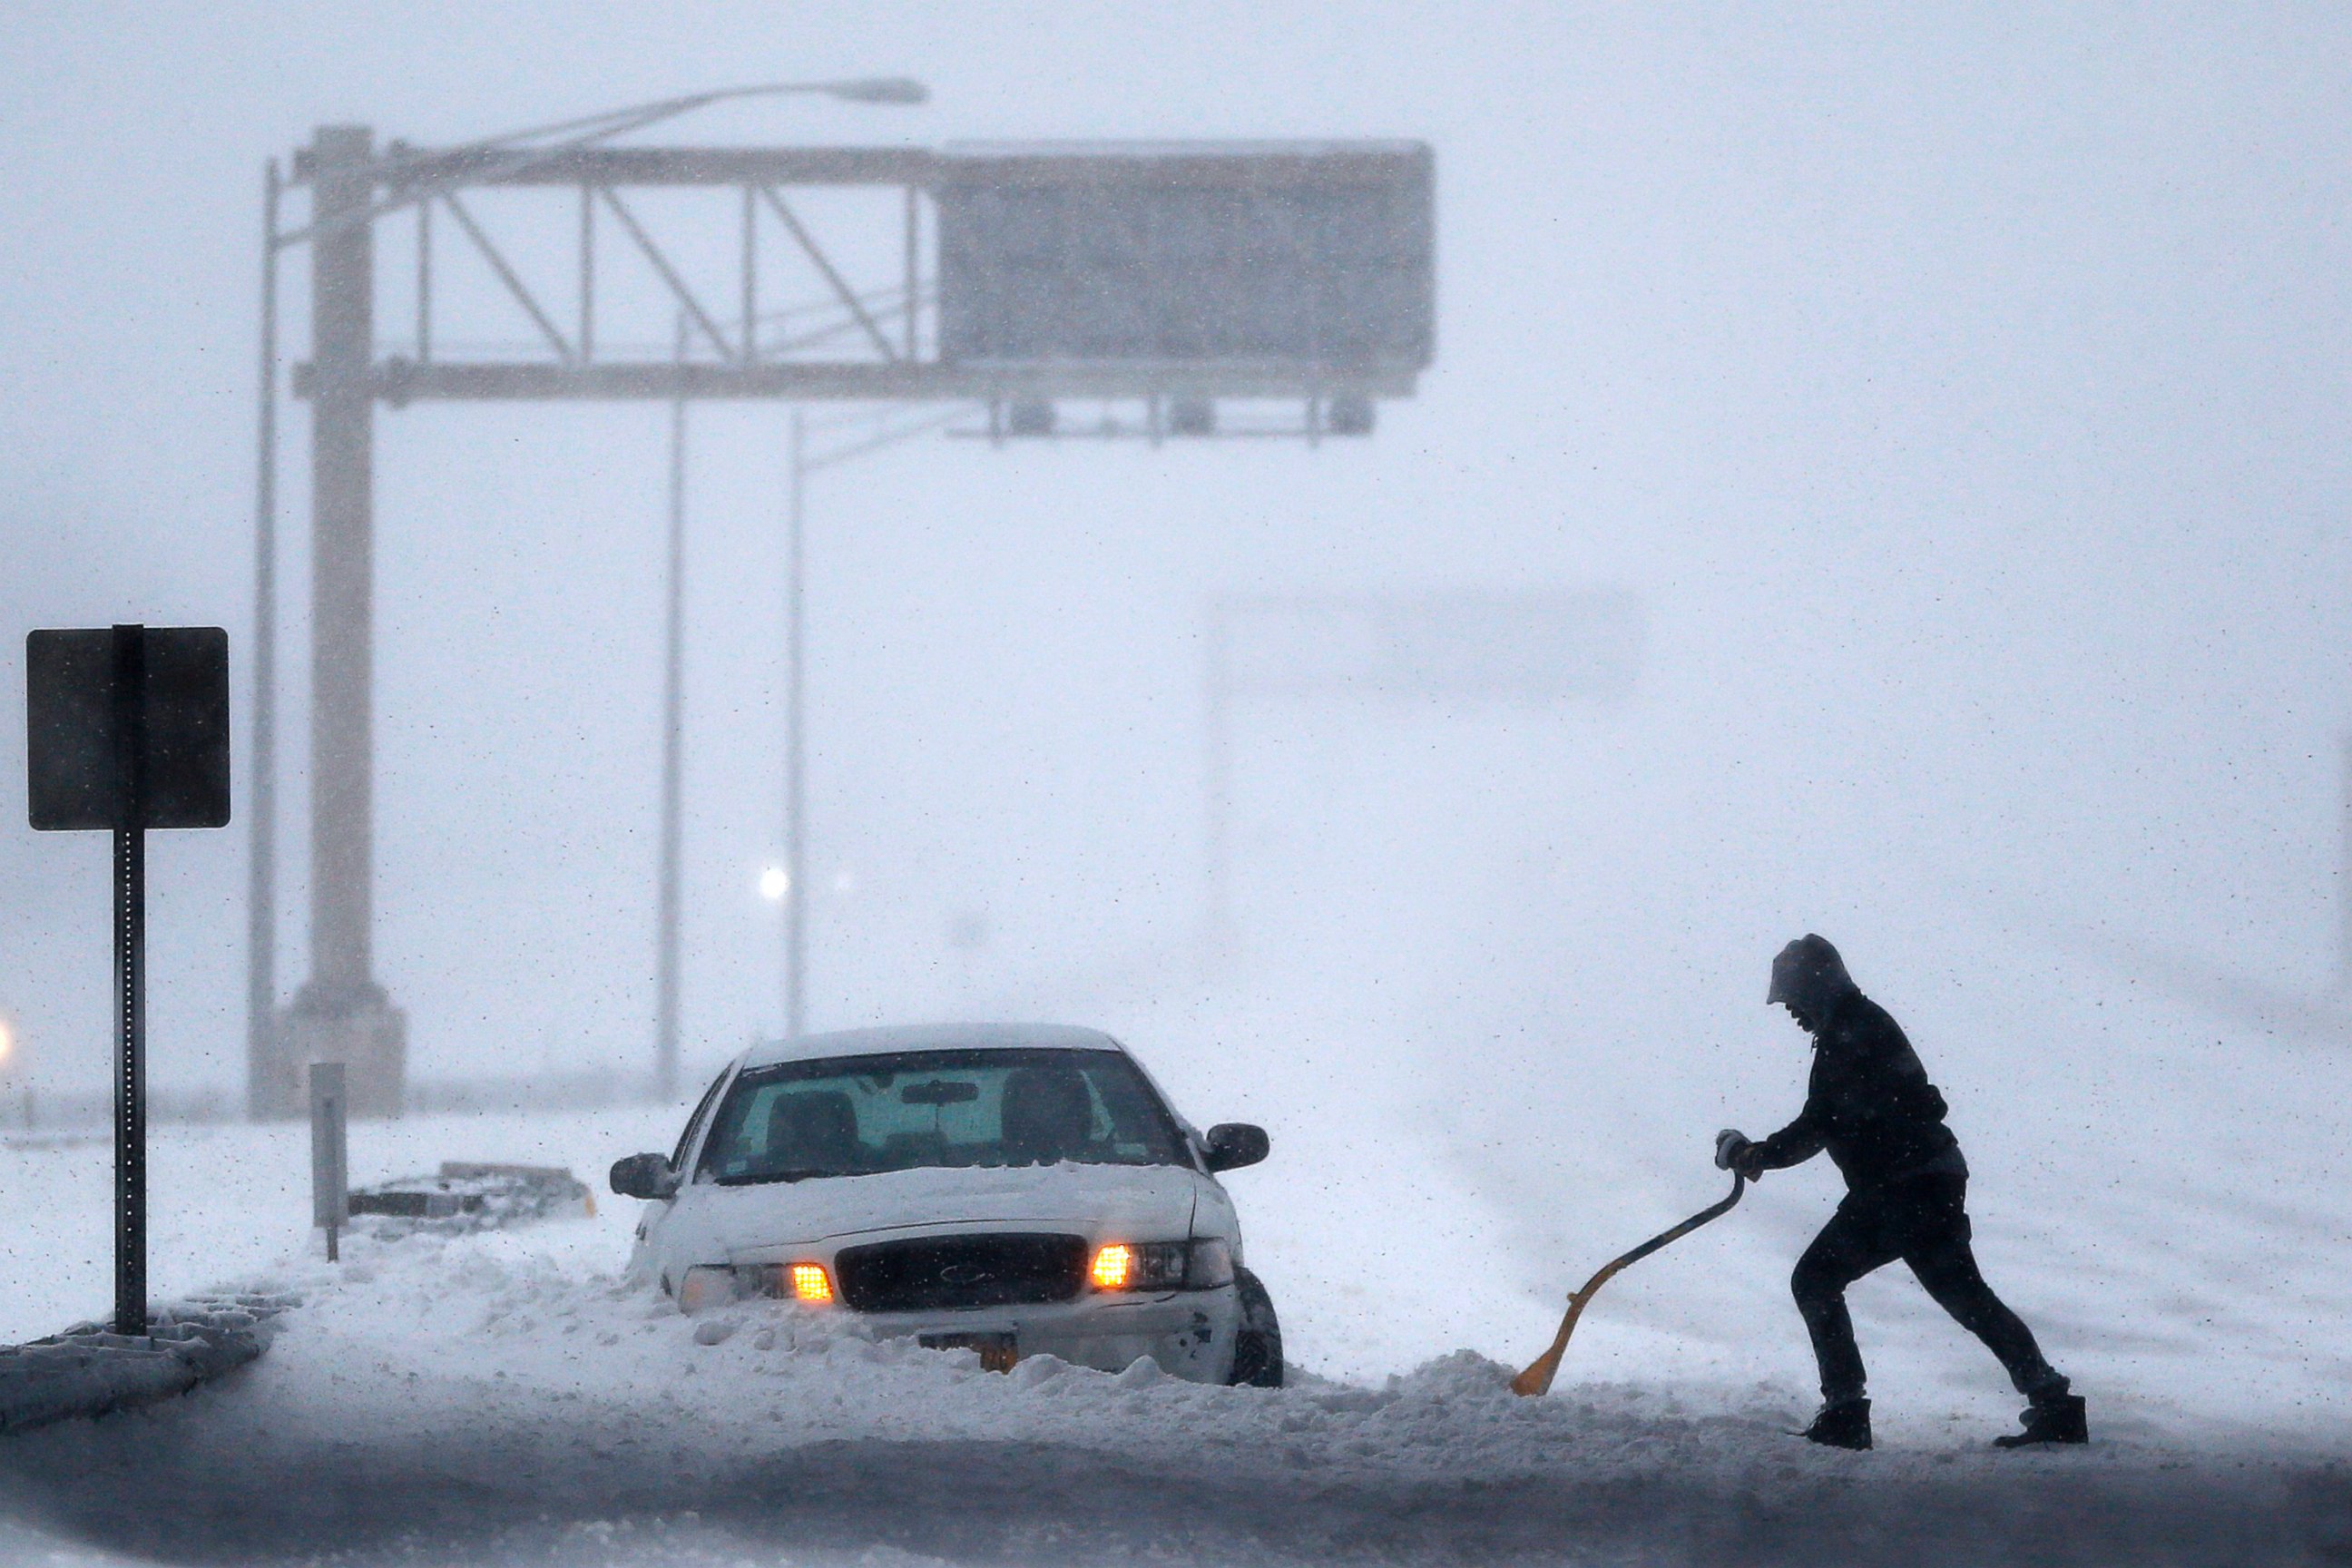 PHOTO:A motorist shovels snow to free up a vehicle on the New Jersey Turnpike during a snowstorm,  Jan. 23, 2016, in Port Reading, N.J.  